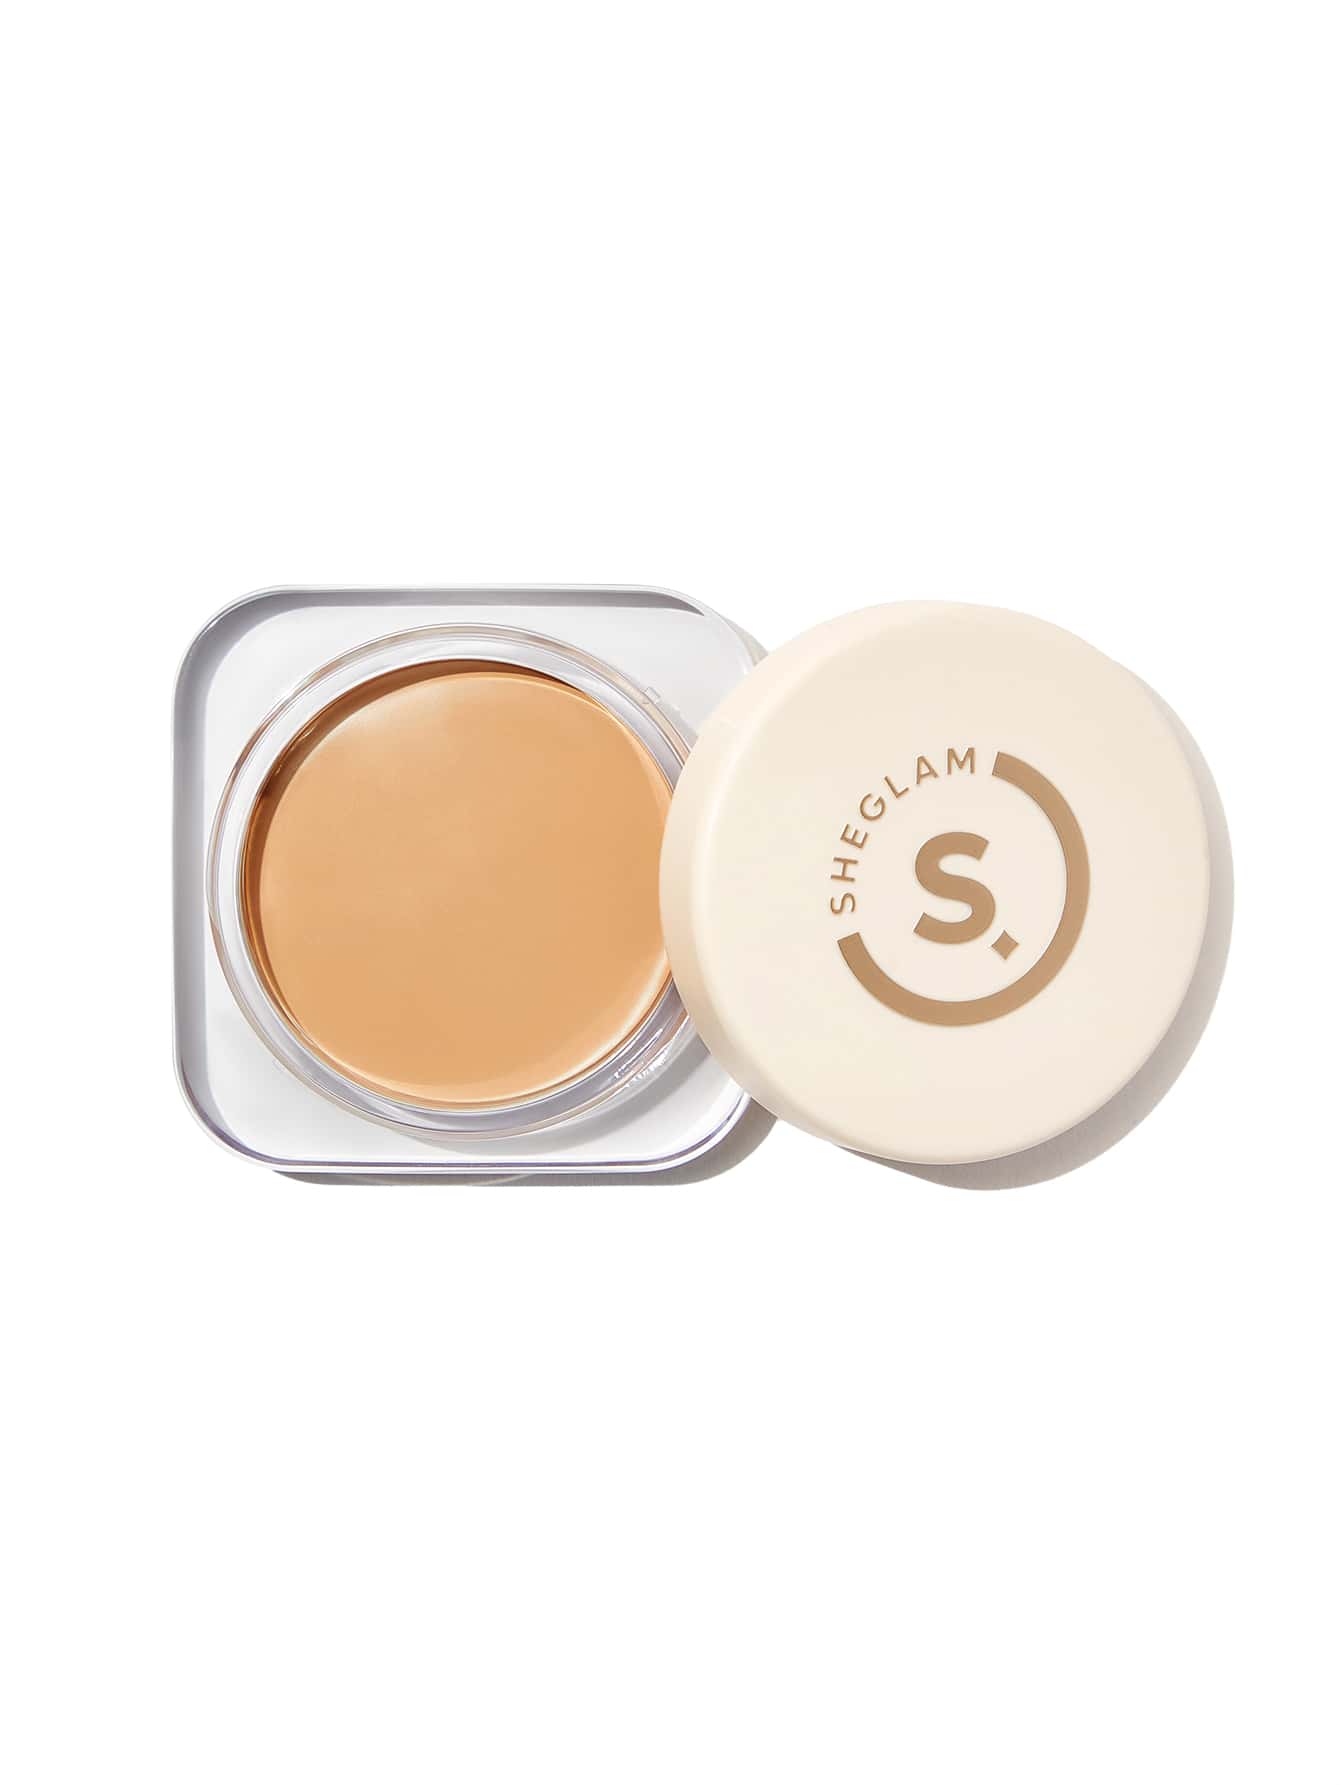 SHEGLAM Full Coverage Foundation Balm-Peach Long Lasting Flawless Moisturizing Foundation Oil-Control Color Corrector Concealer Poreless Cover Blemish Non-Greasy Non-Caking Smoother-Looking Cream Foundation